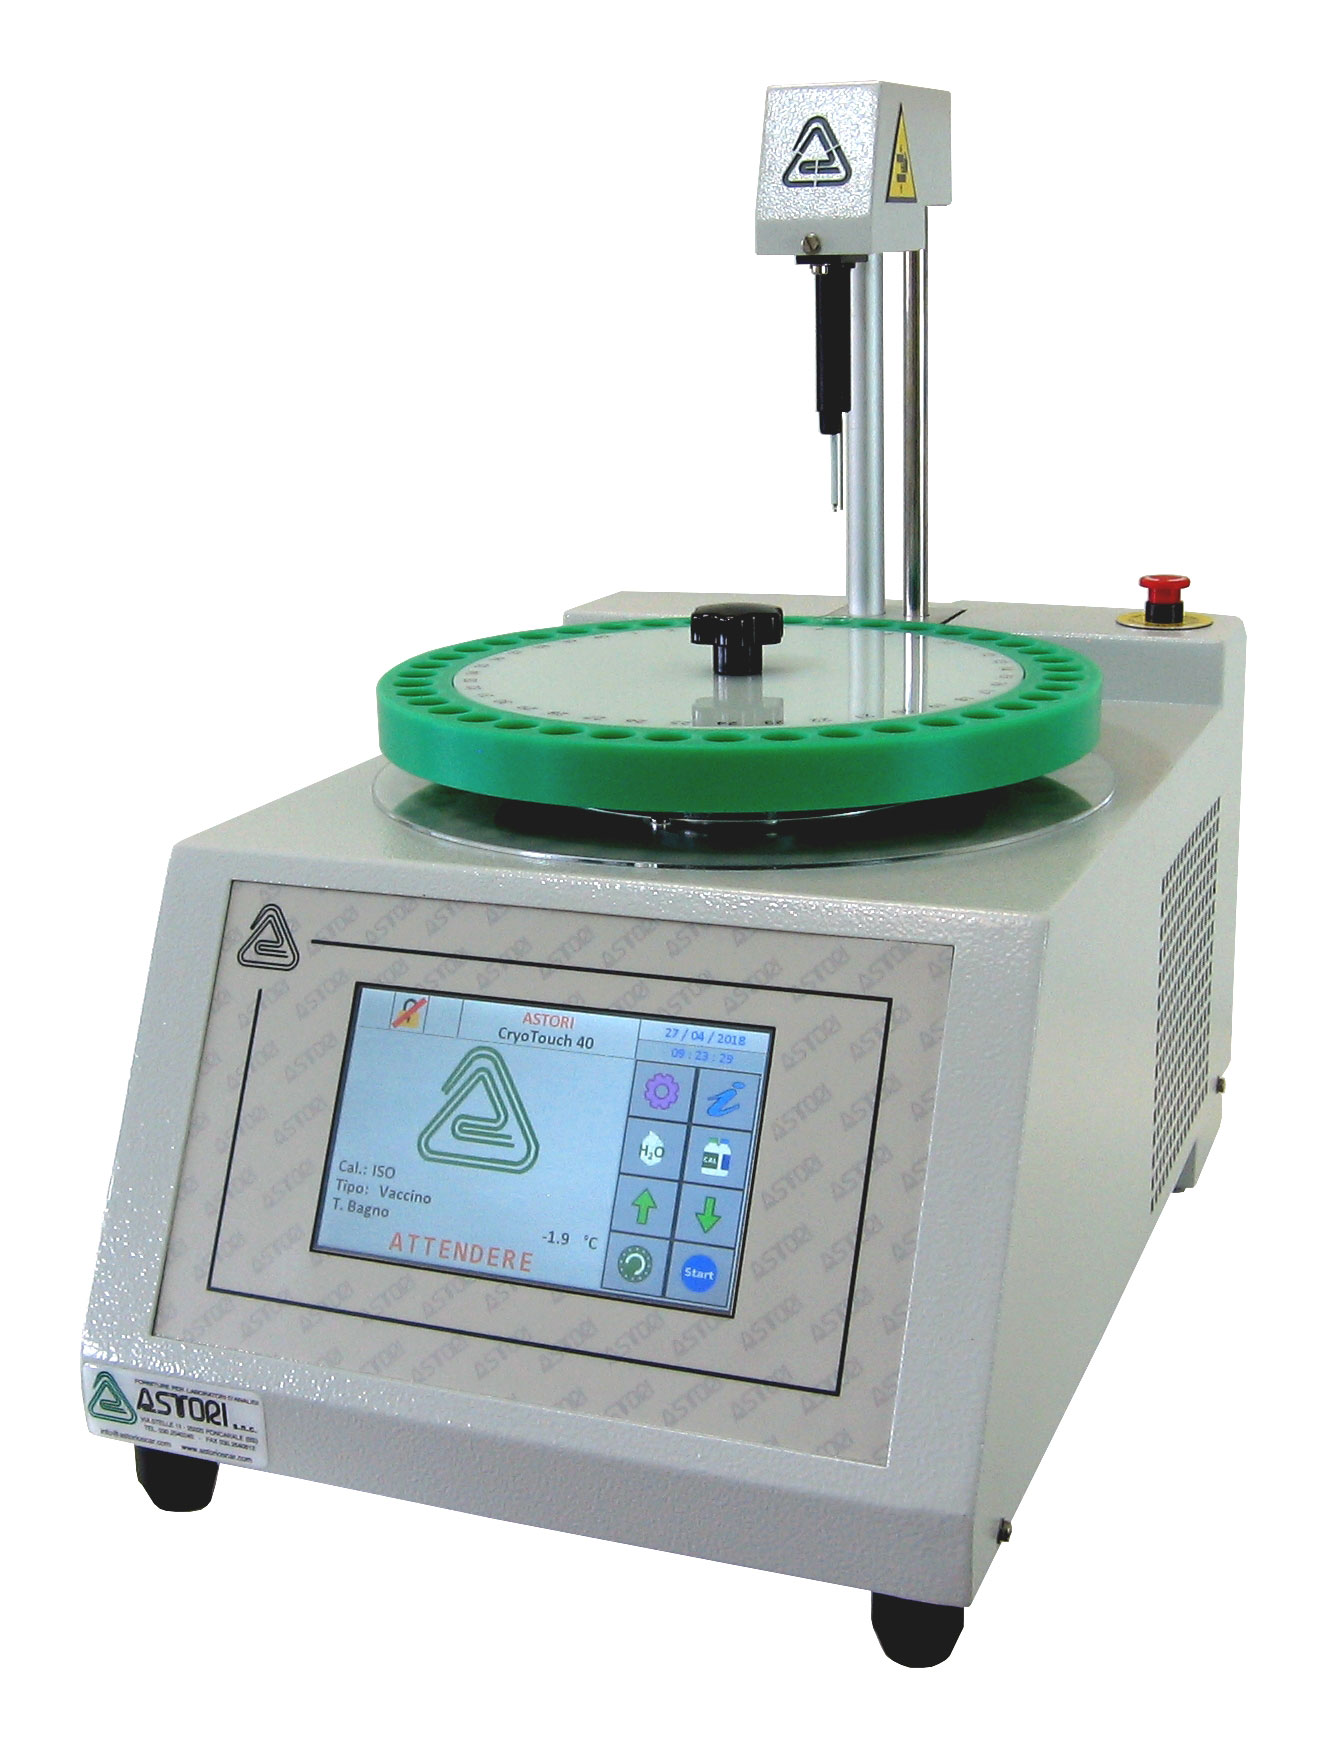 CryoTouch 40 automatic cryoscoper with ''lactose-free'' function. ASTORI TECNICA. Number of samples: 40. Sample volume (ml): 2 or 2.5. Resolution (ºC): ±0.0005. Reproducibility (ºC): ±0.0025 (bovine milk). Dim. WxHxD (mm): 330x360x610 (with head down). Weight (kg): 20.5.Supplied with a 'starter-kit' including a box of glass sample tubes, a tube-holder, 3 calibration standards and a cooling liquid bottle.